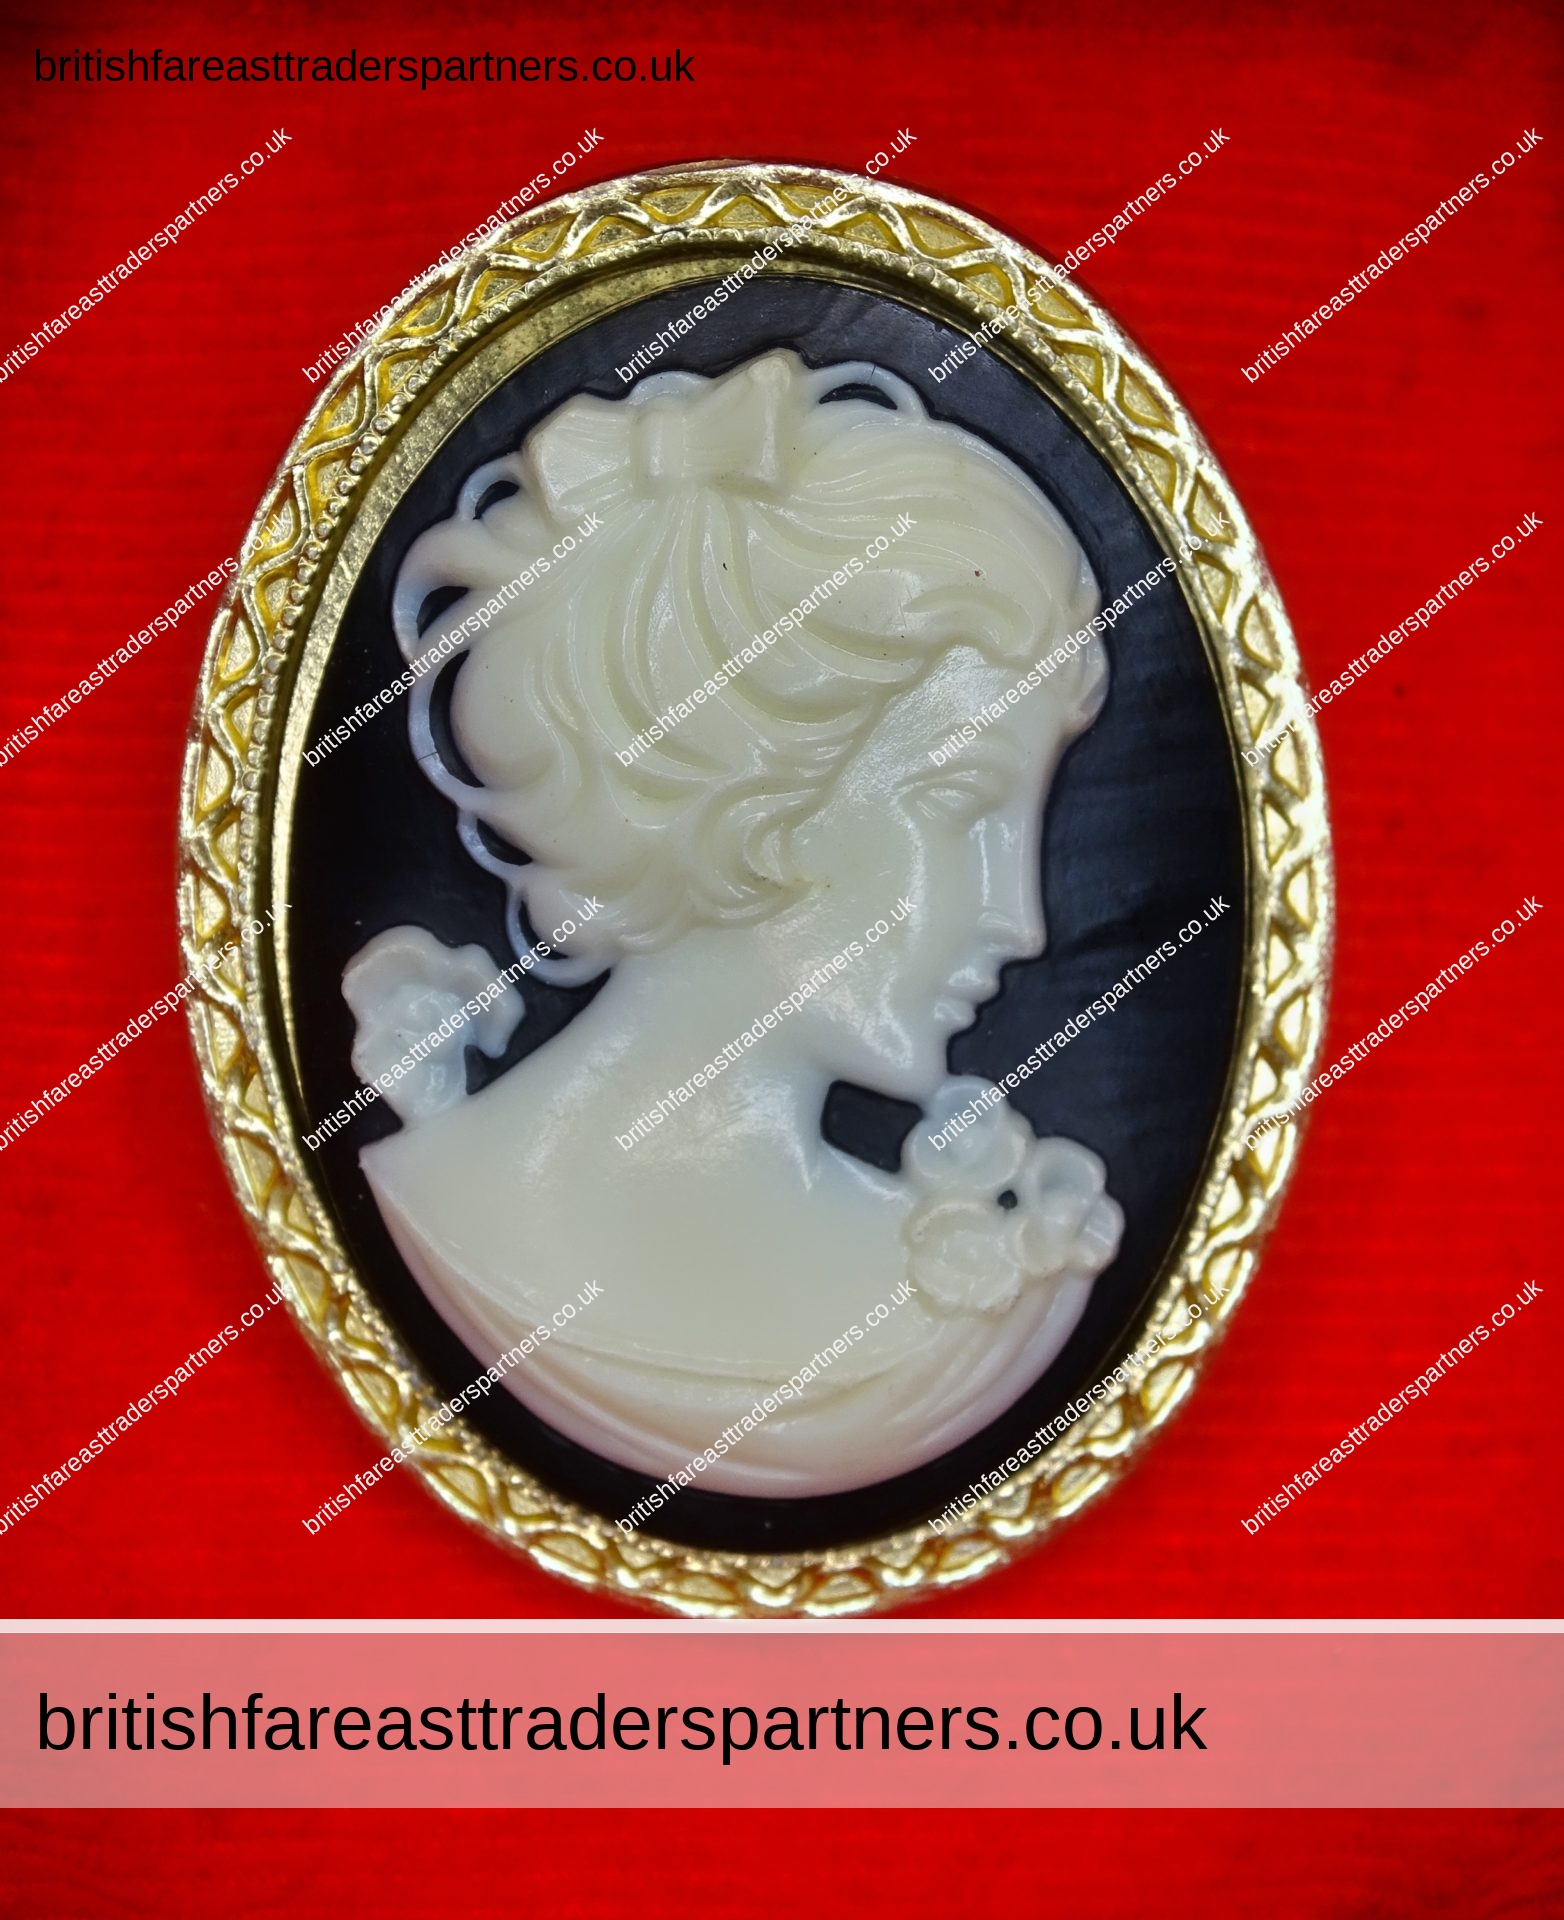 VINTAGE STYLE LADY CAMEO BROOCH “VICTORIAN REVIVAL” GOLD TONE COLOUR VINTAGE | FASHION | VICTORIAN | HERITAGE | LIFESTYLE | CULTURE | BRITISH